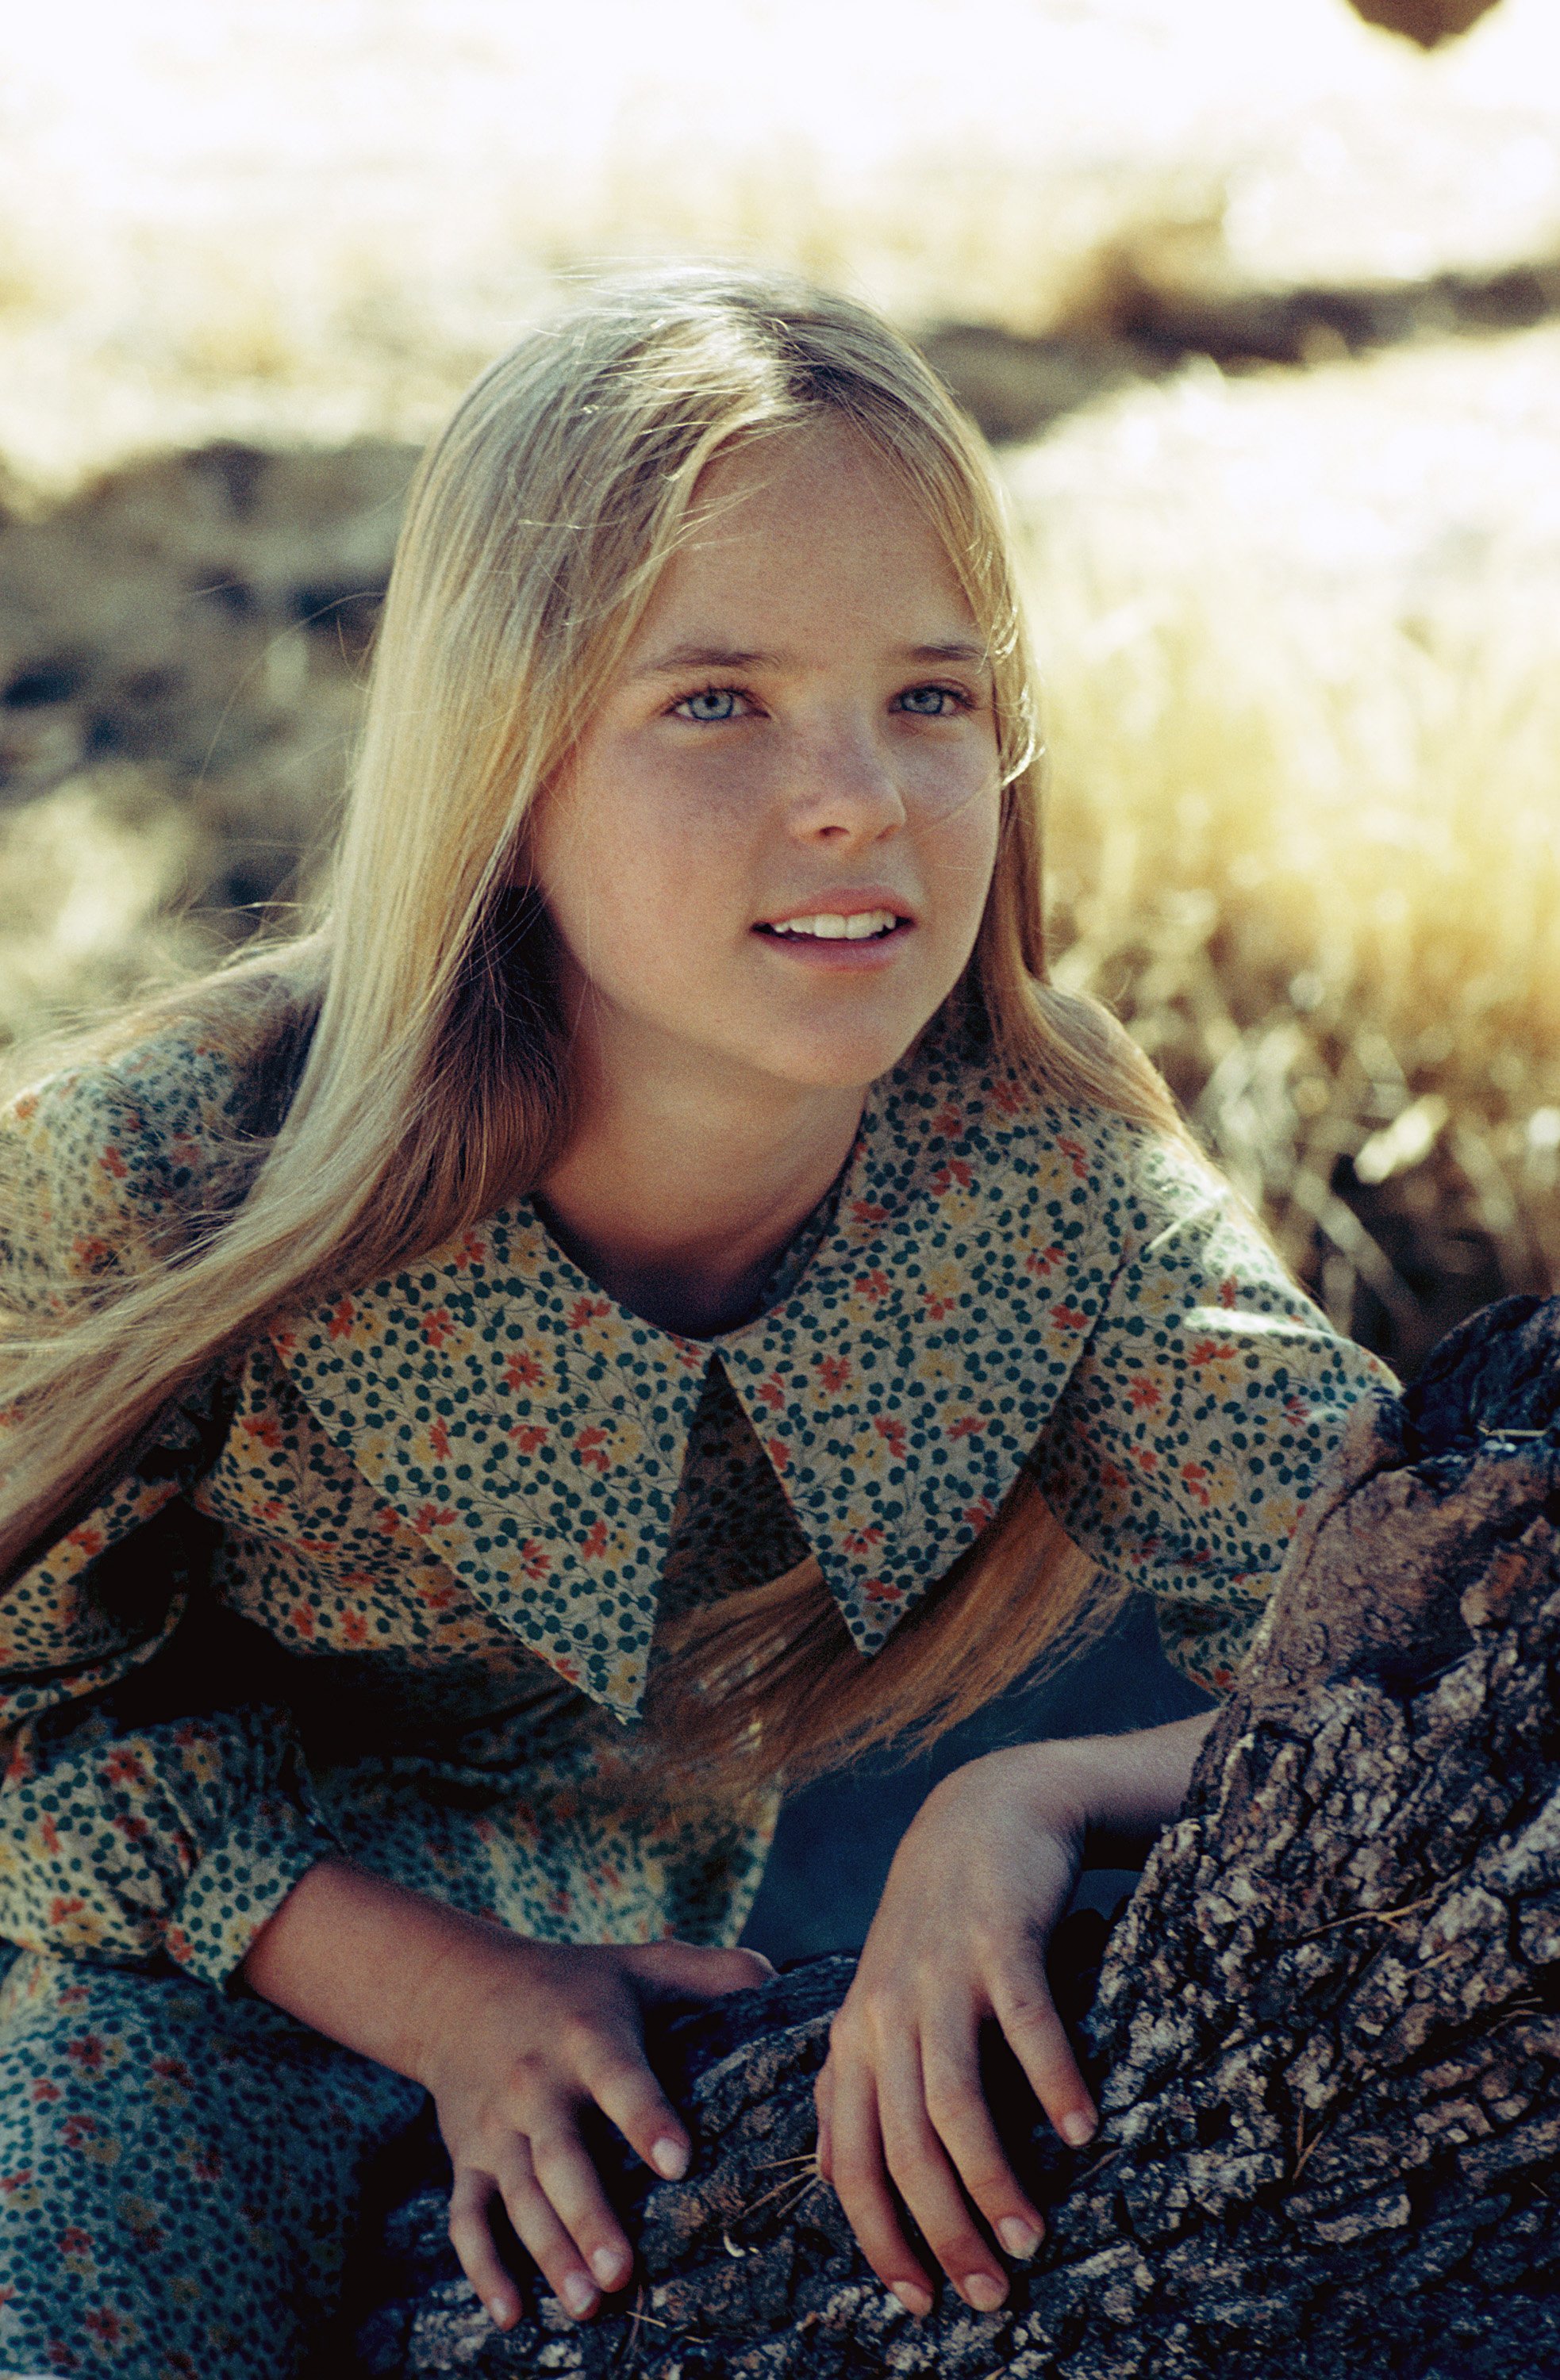 LITTLE HOUSE ON THE PRAIRIE -- Season 1 -- Pictured: Melissa Sue Anderson as Mary Ingalls | Photo: GettyImages